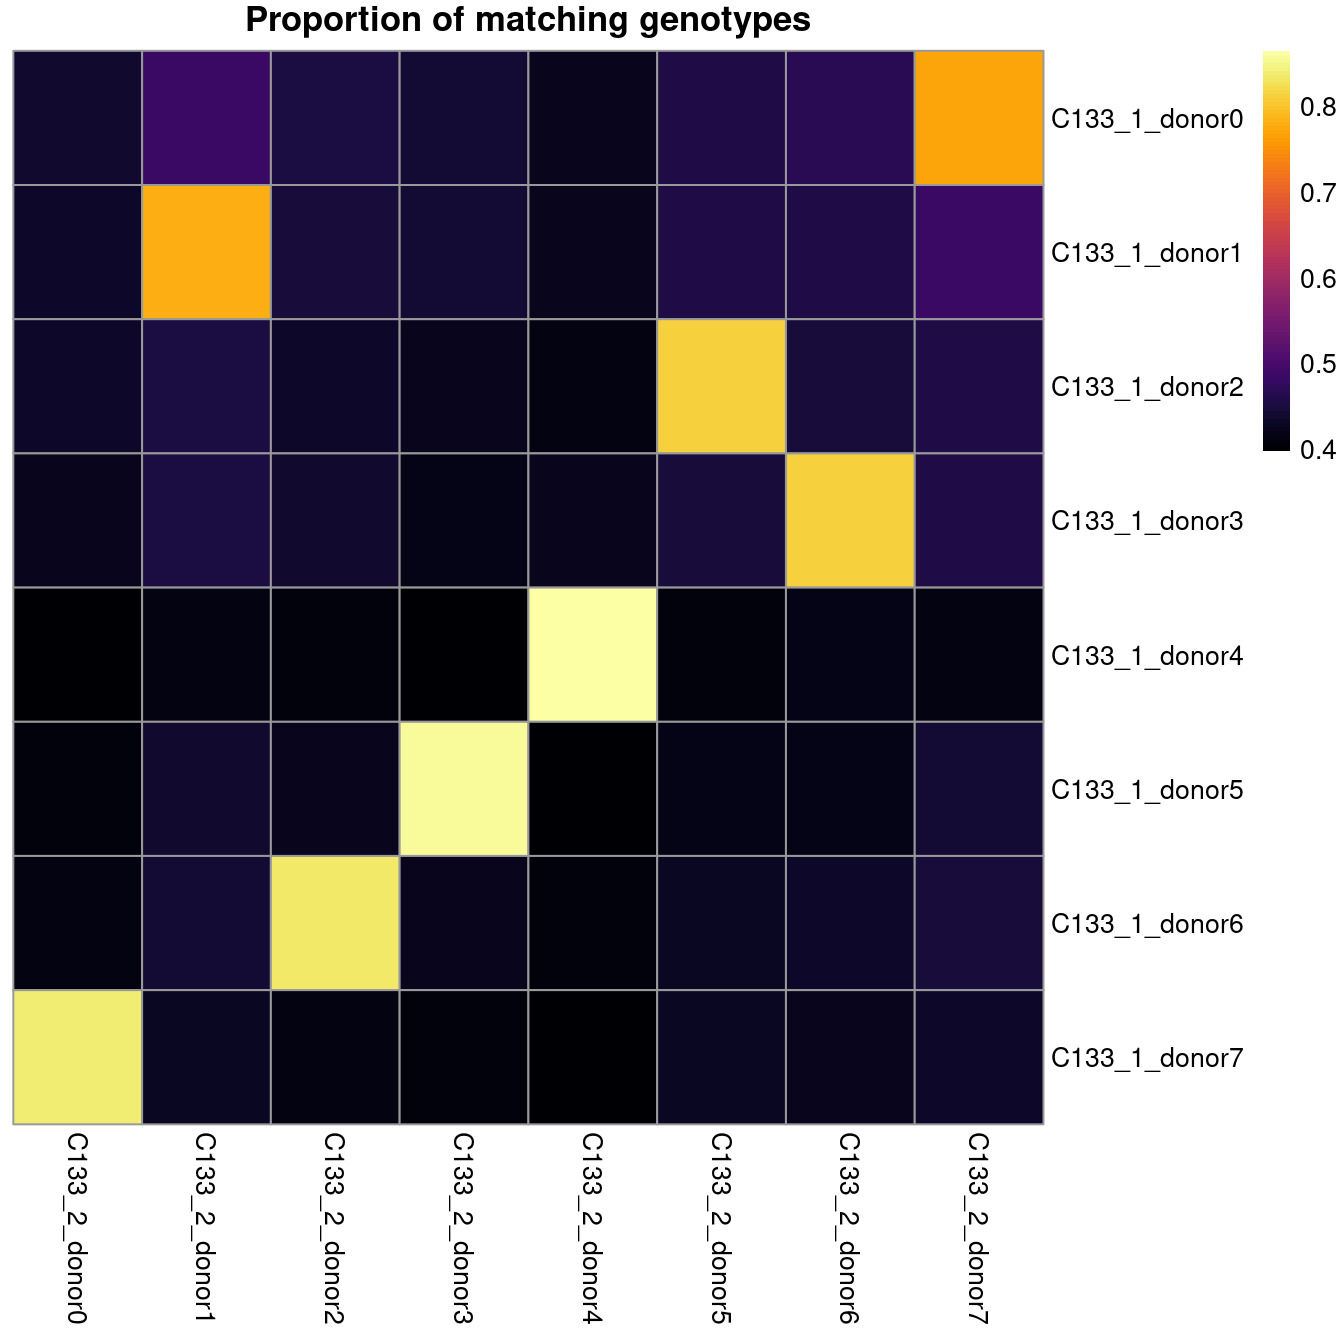 Proportion of matching genotypes between capture `C133_1` (rows) and capture `C133_2` (columns).